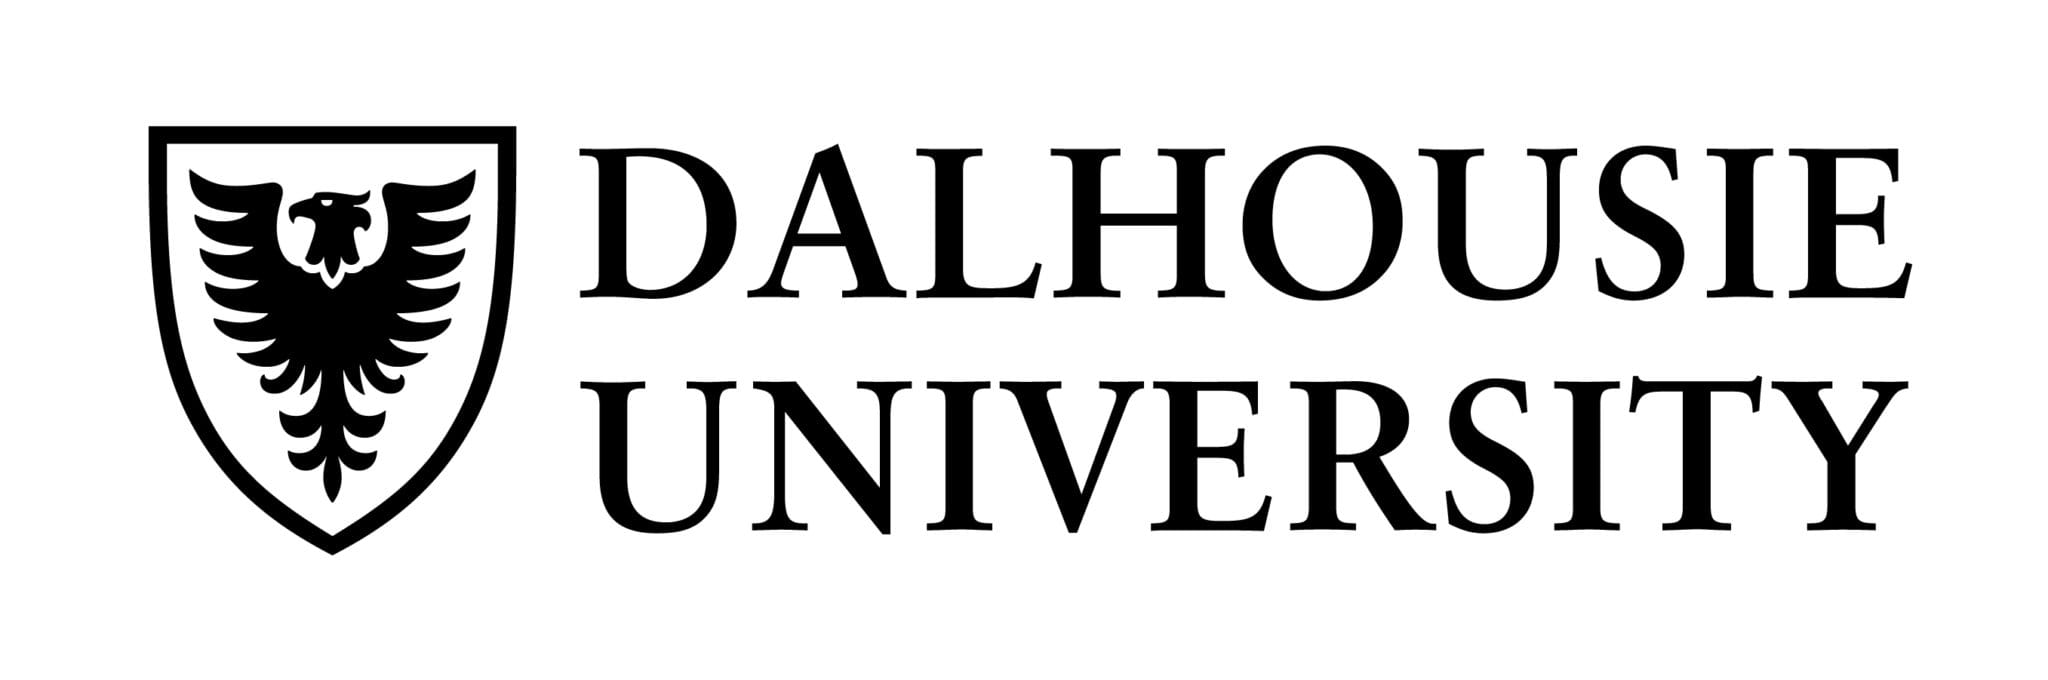 Logo of dalhousie university featuring a black double-headed eagle on a shield with the university name above in bold letters.